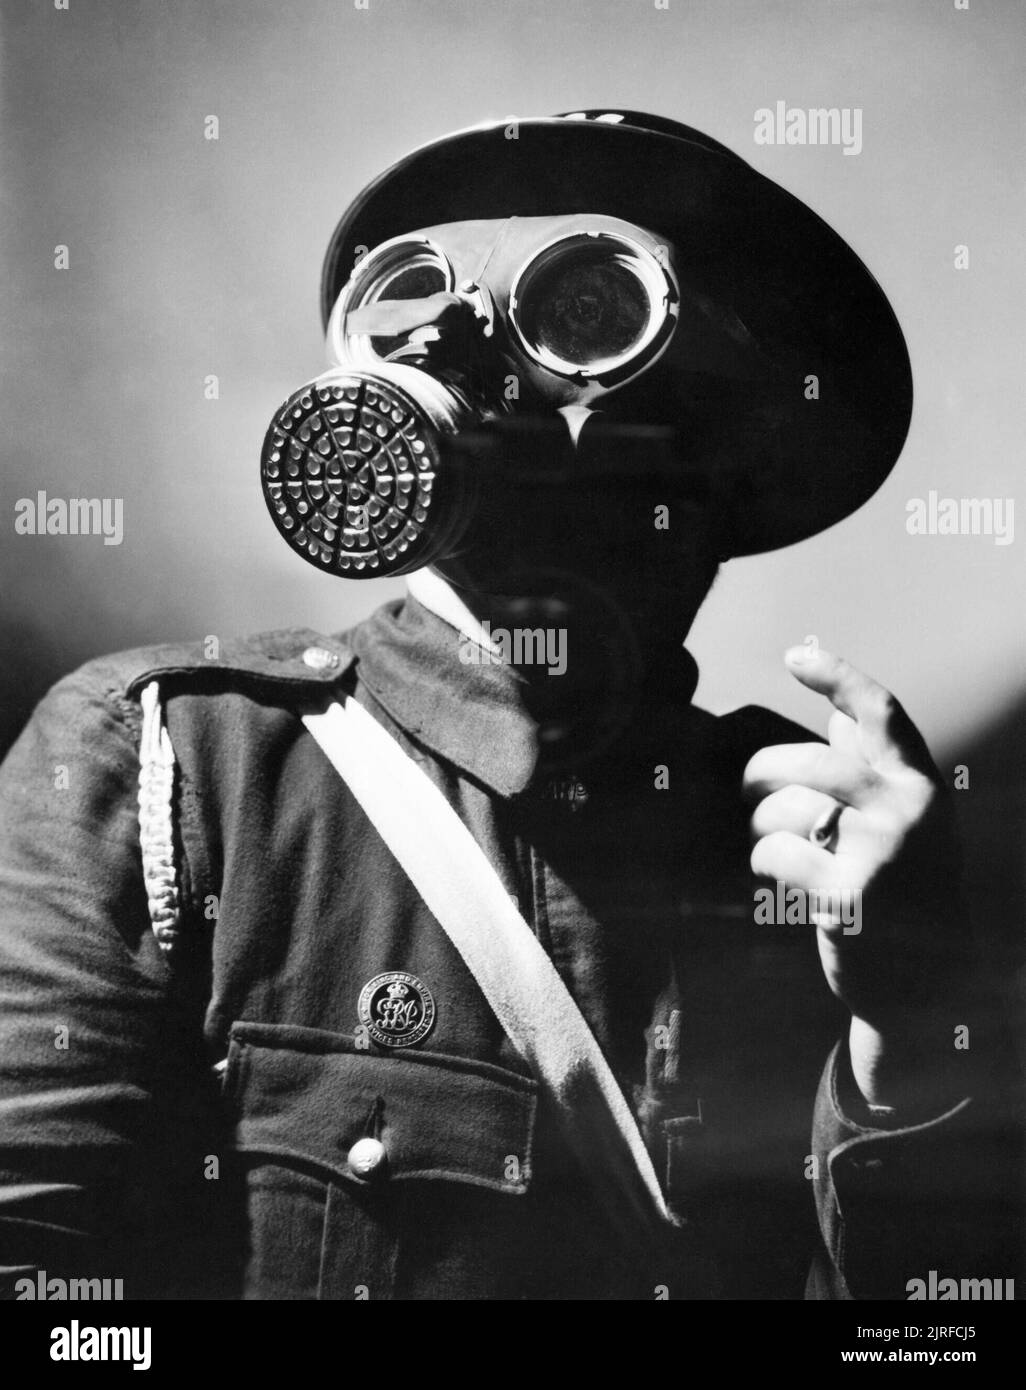 An Air Raid Warden wearing his steel helmet and duty gas mask during the Second World War. A head and shoulders portrait of an Air Raid Warden wearing his steel helmet and duty gas mask. The warden also wears a white sash, probably to make him more visible in the blackout. Stock Photo